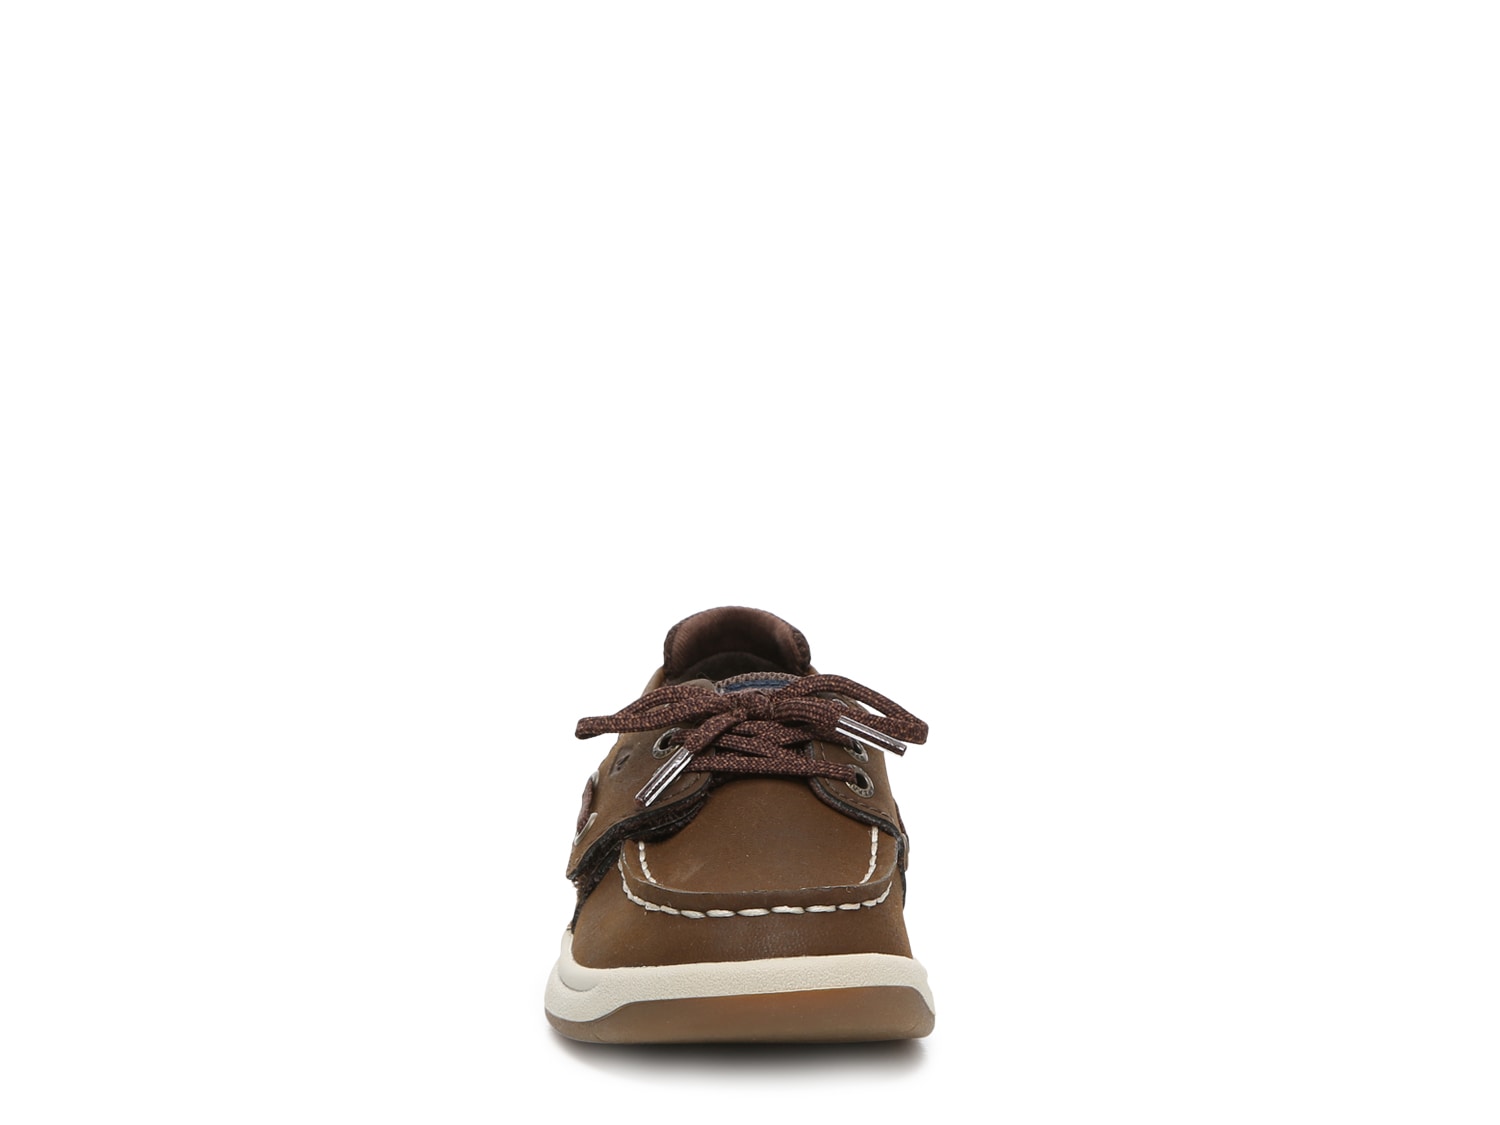 sperry shoes dsw